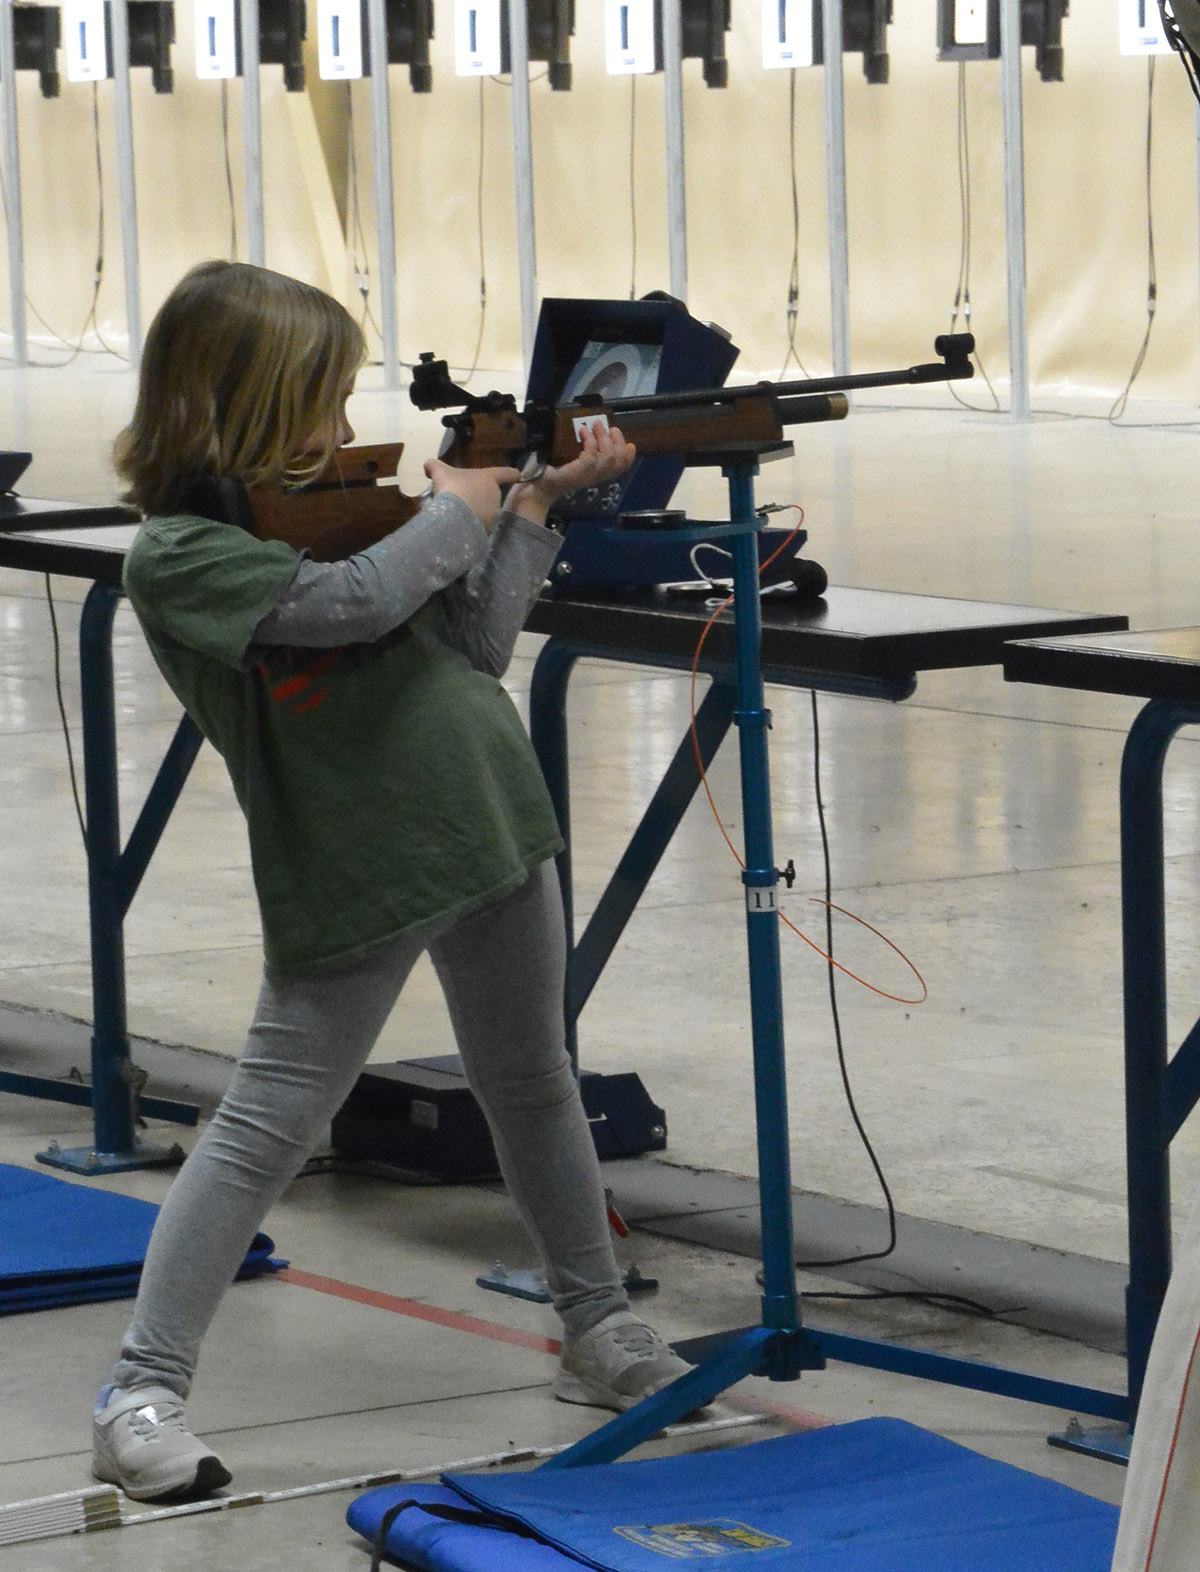 The Monthly Matches are held at CMP’s air gun facilities in Ohio and Alabama.